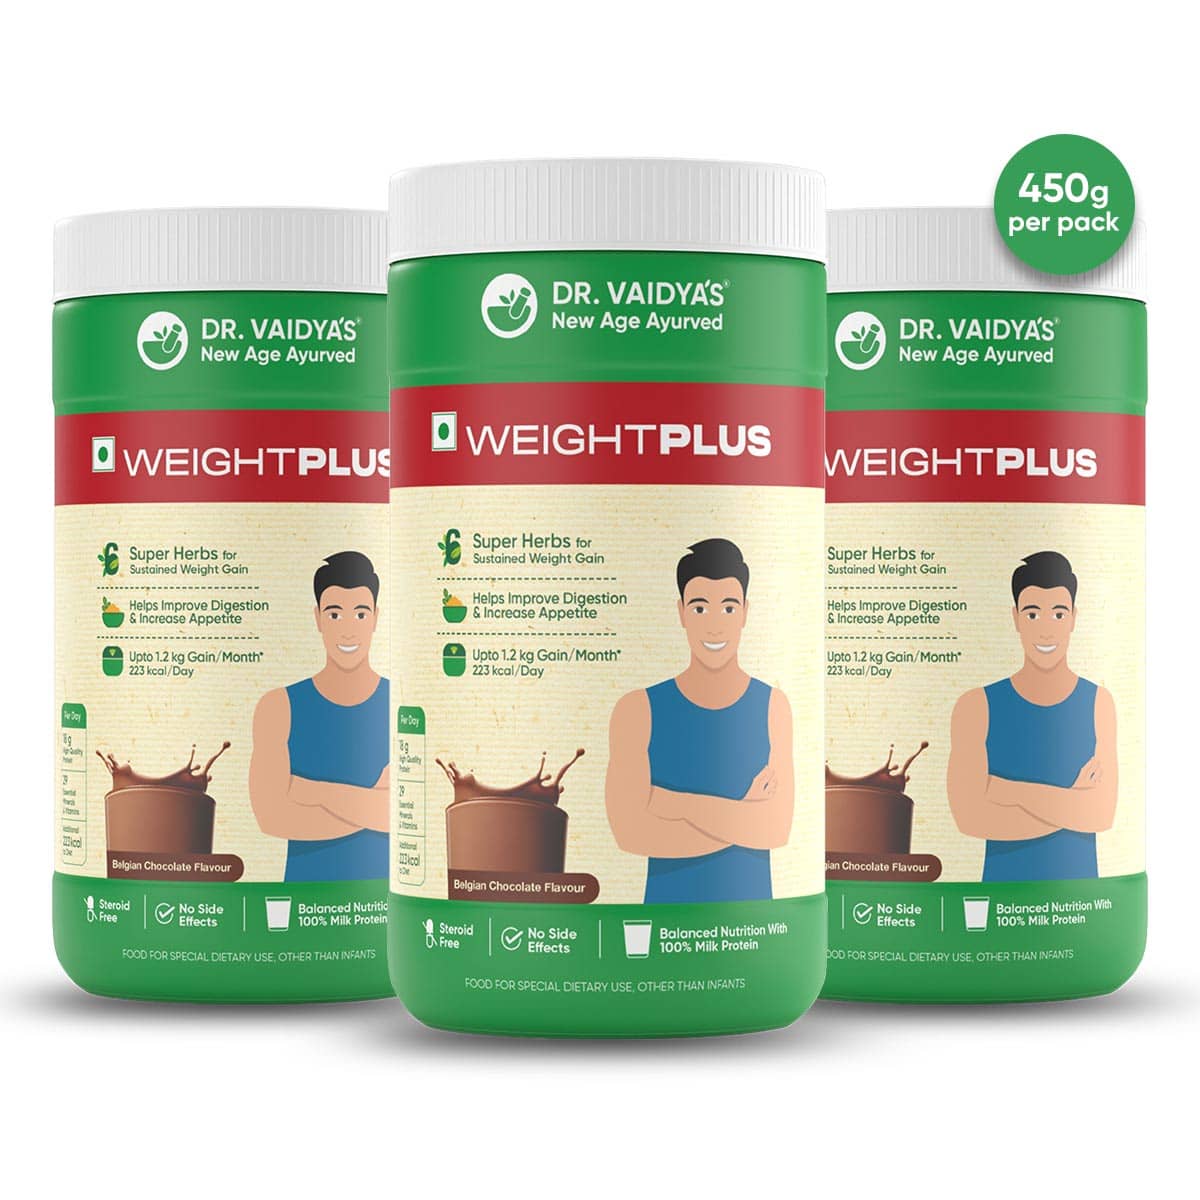 WeightPlus: For Healthy Weight Gain Upto 1.2 Kg/Month